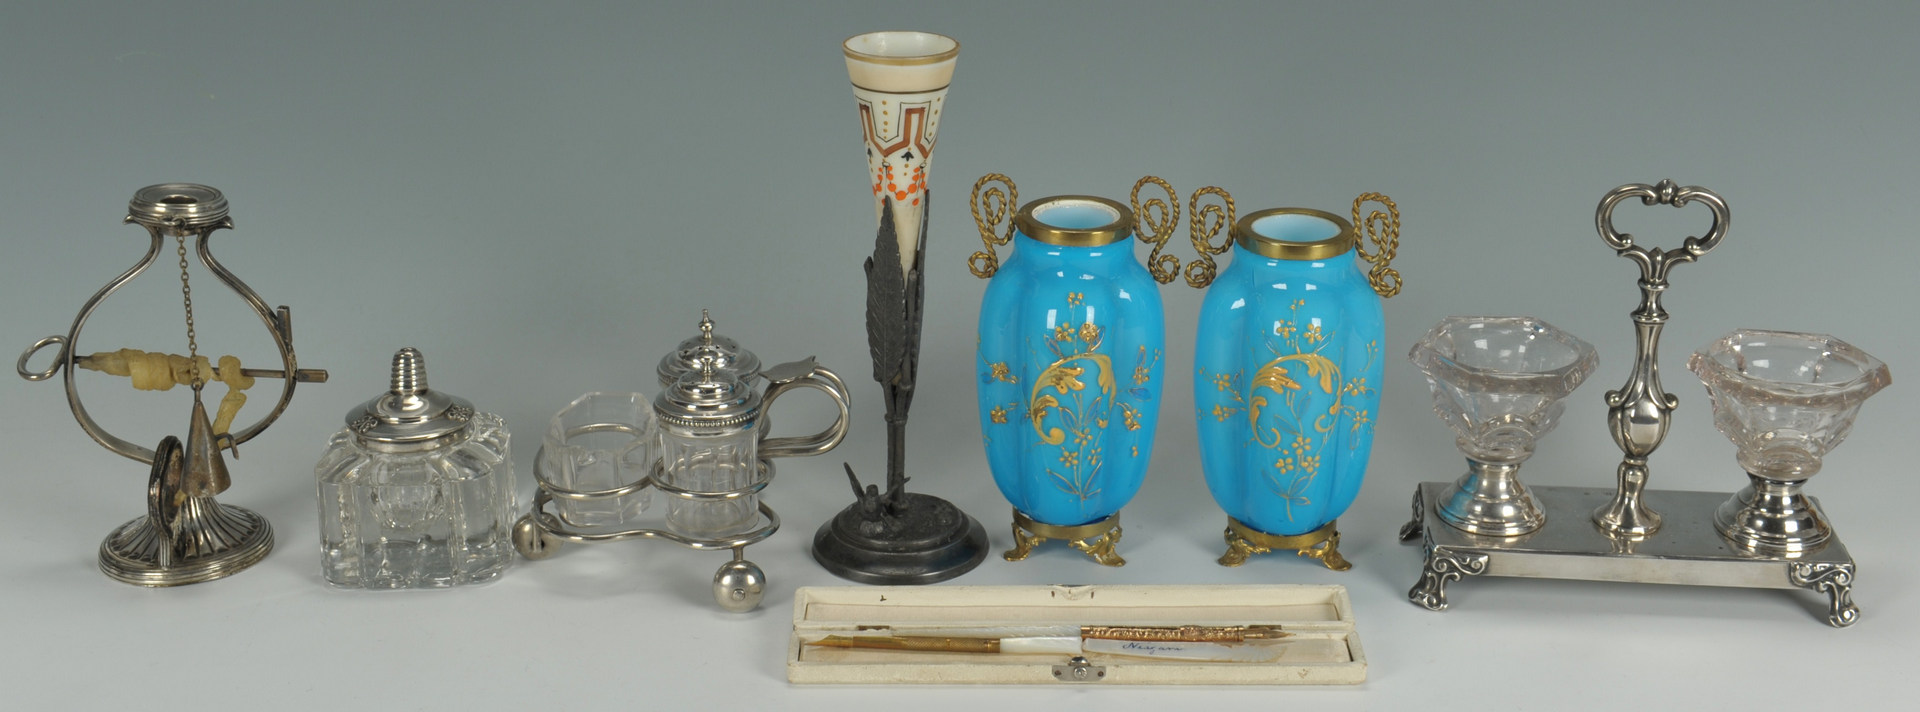 Lot 631: Asst'd silverplate, mother of pearl table items